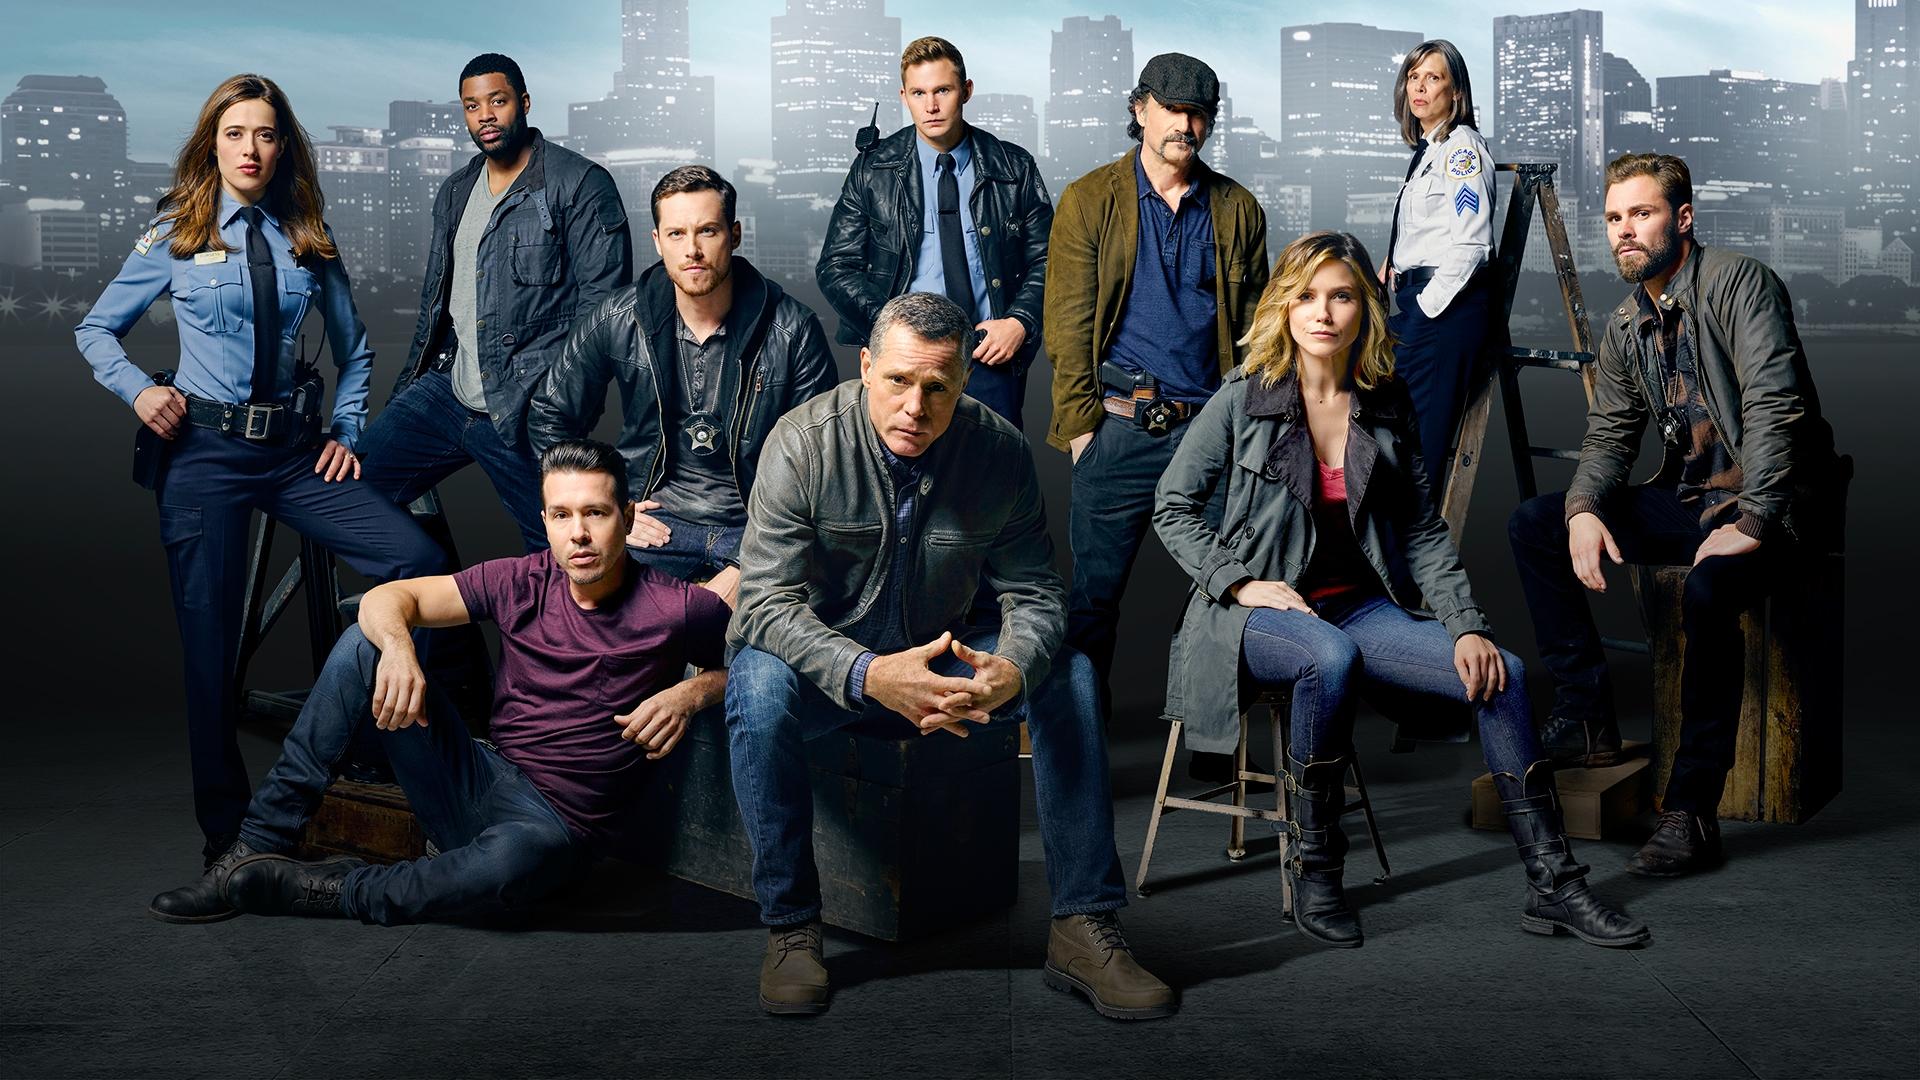 Chicago P.D. Wallpaper High Resolution and Quality Download